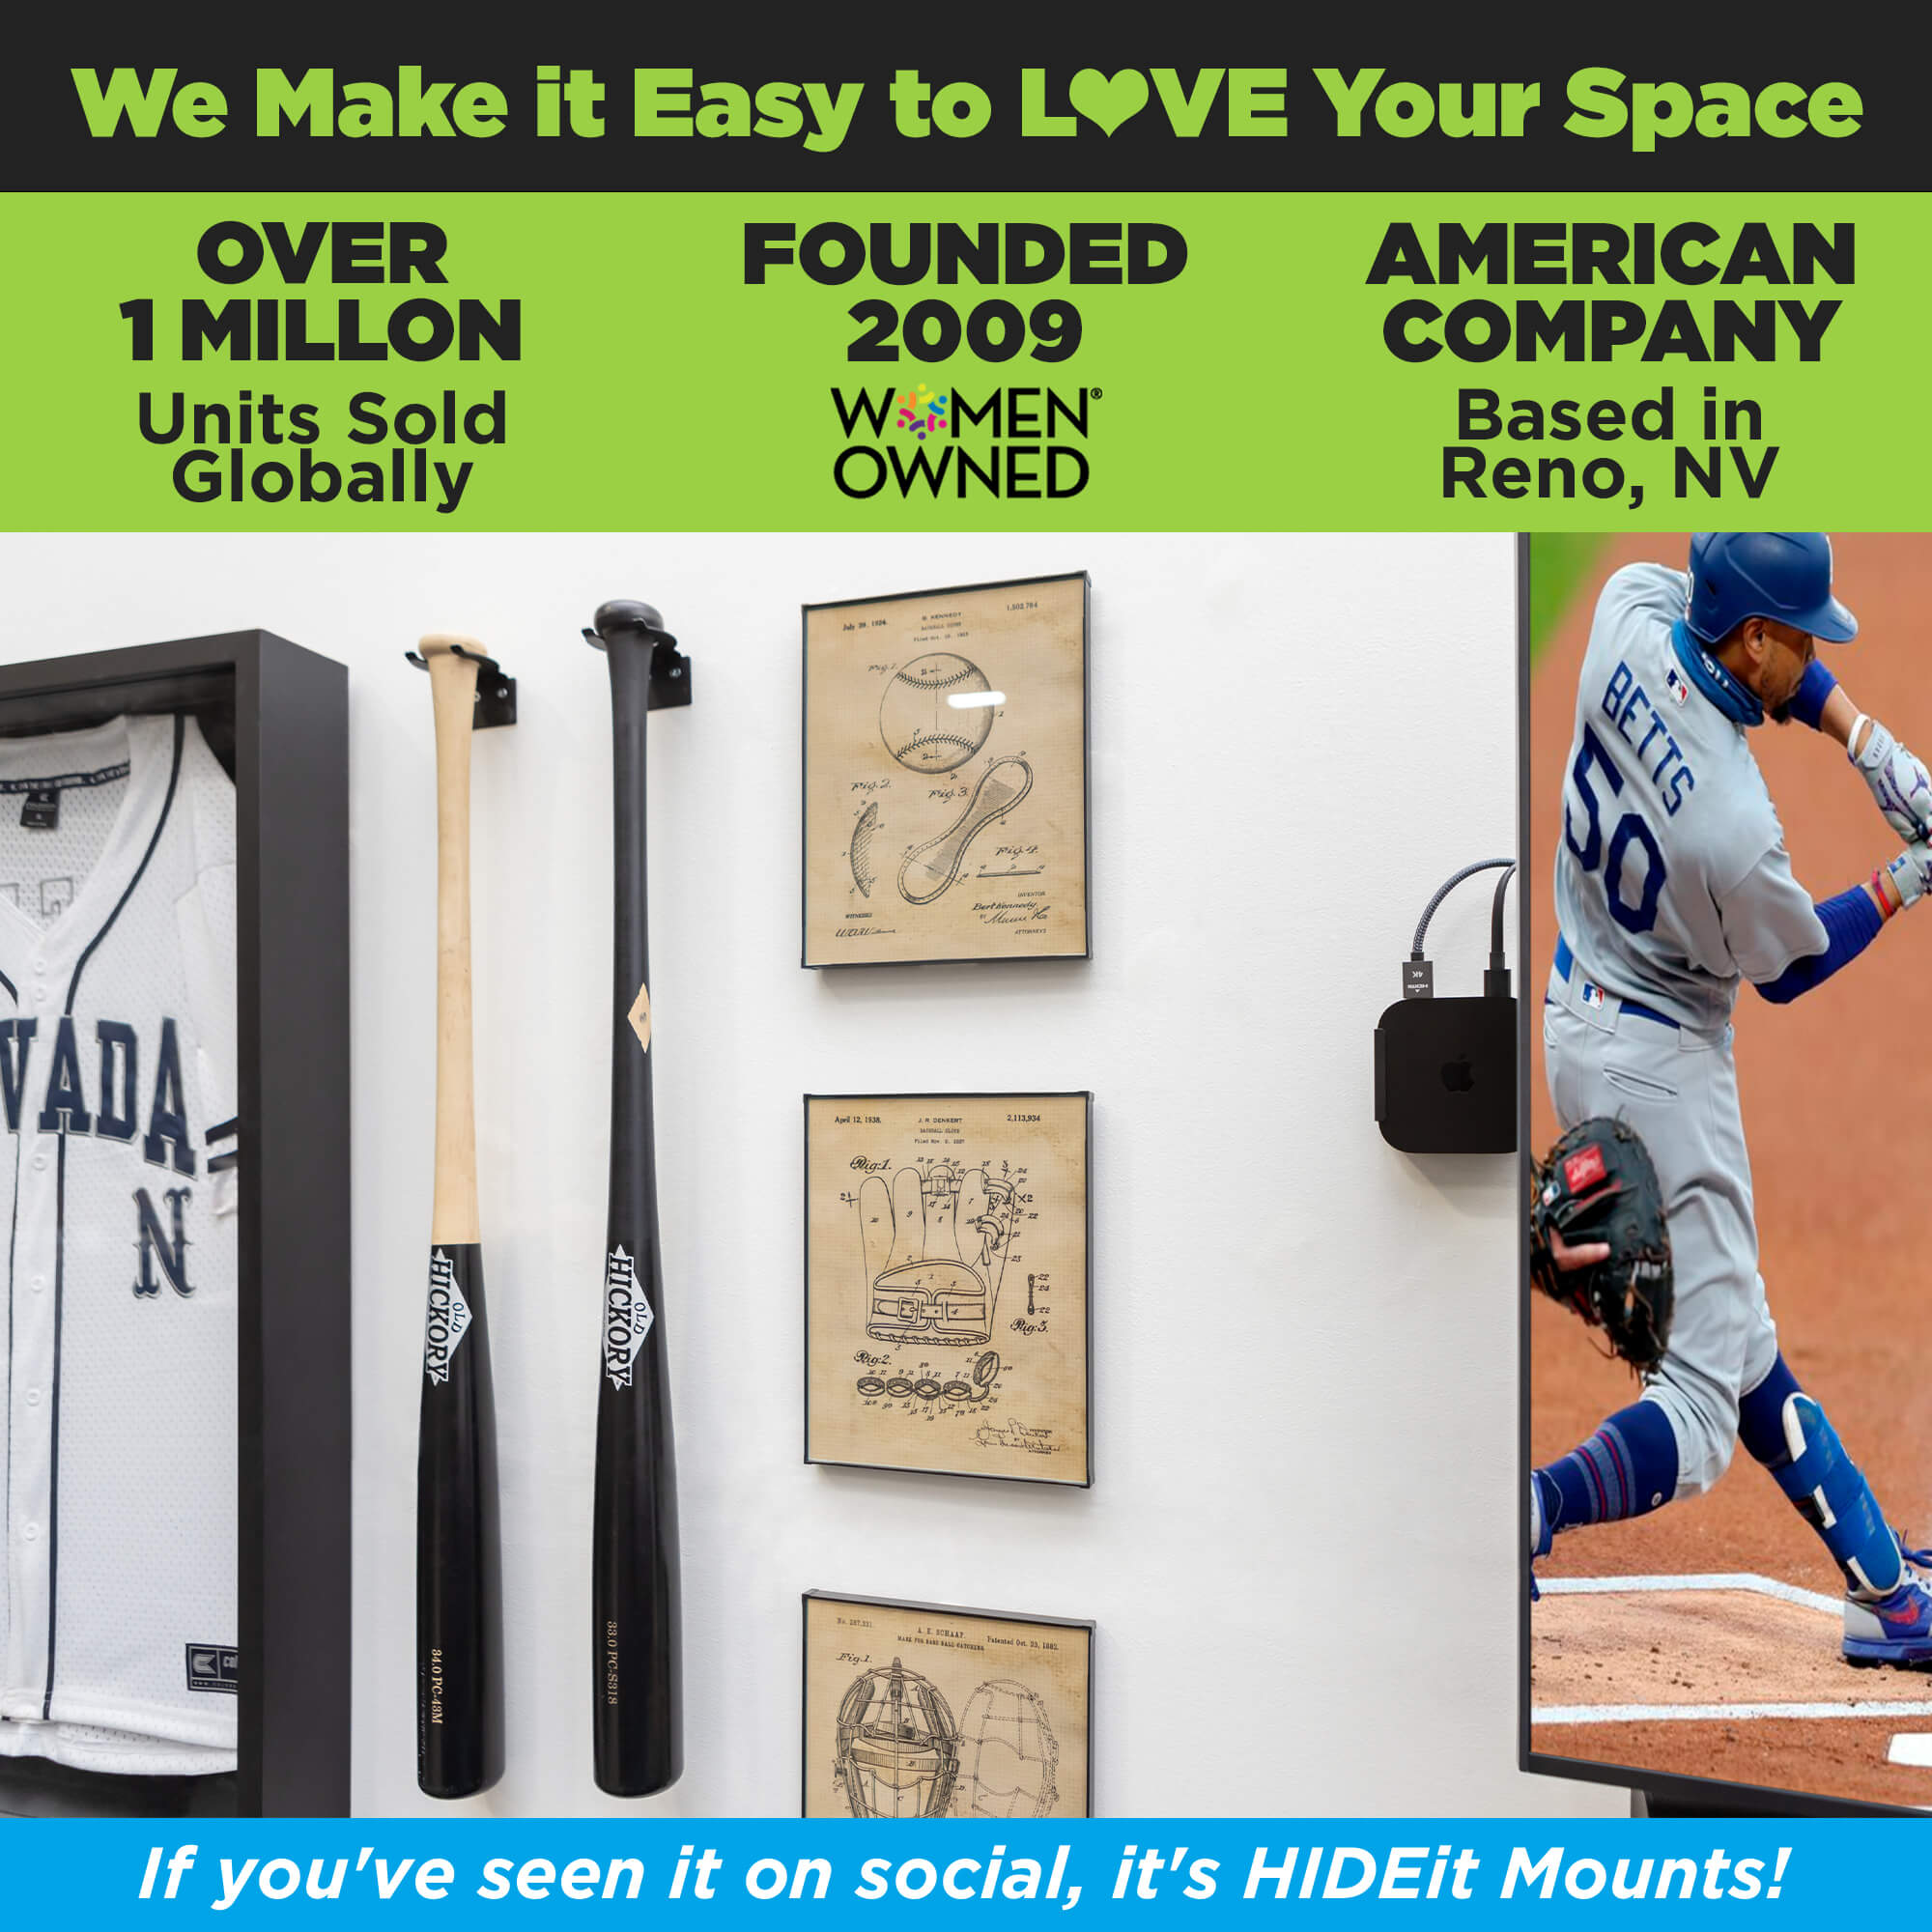 HIDEit Mounts makes it easy to love your space! HIDEit is an American company with over 1 million units sold globally. 